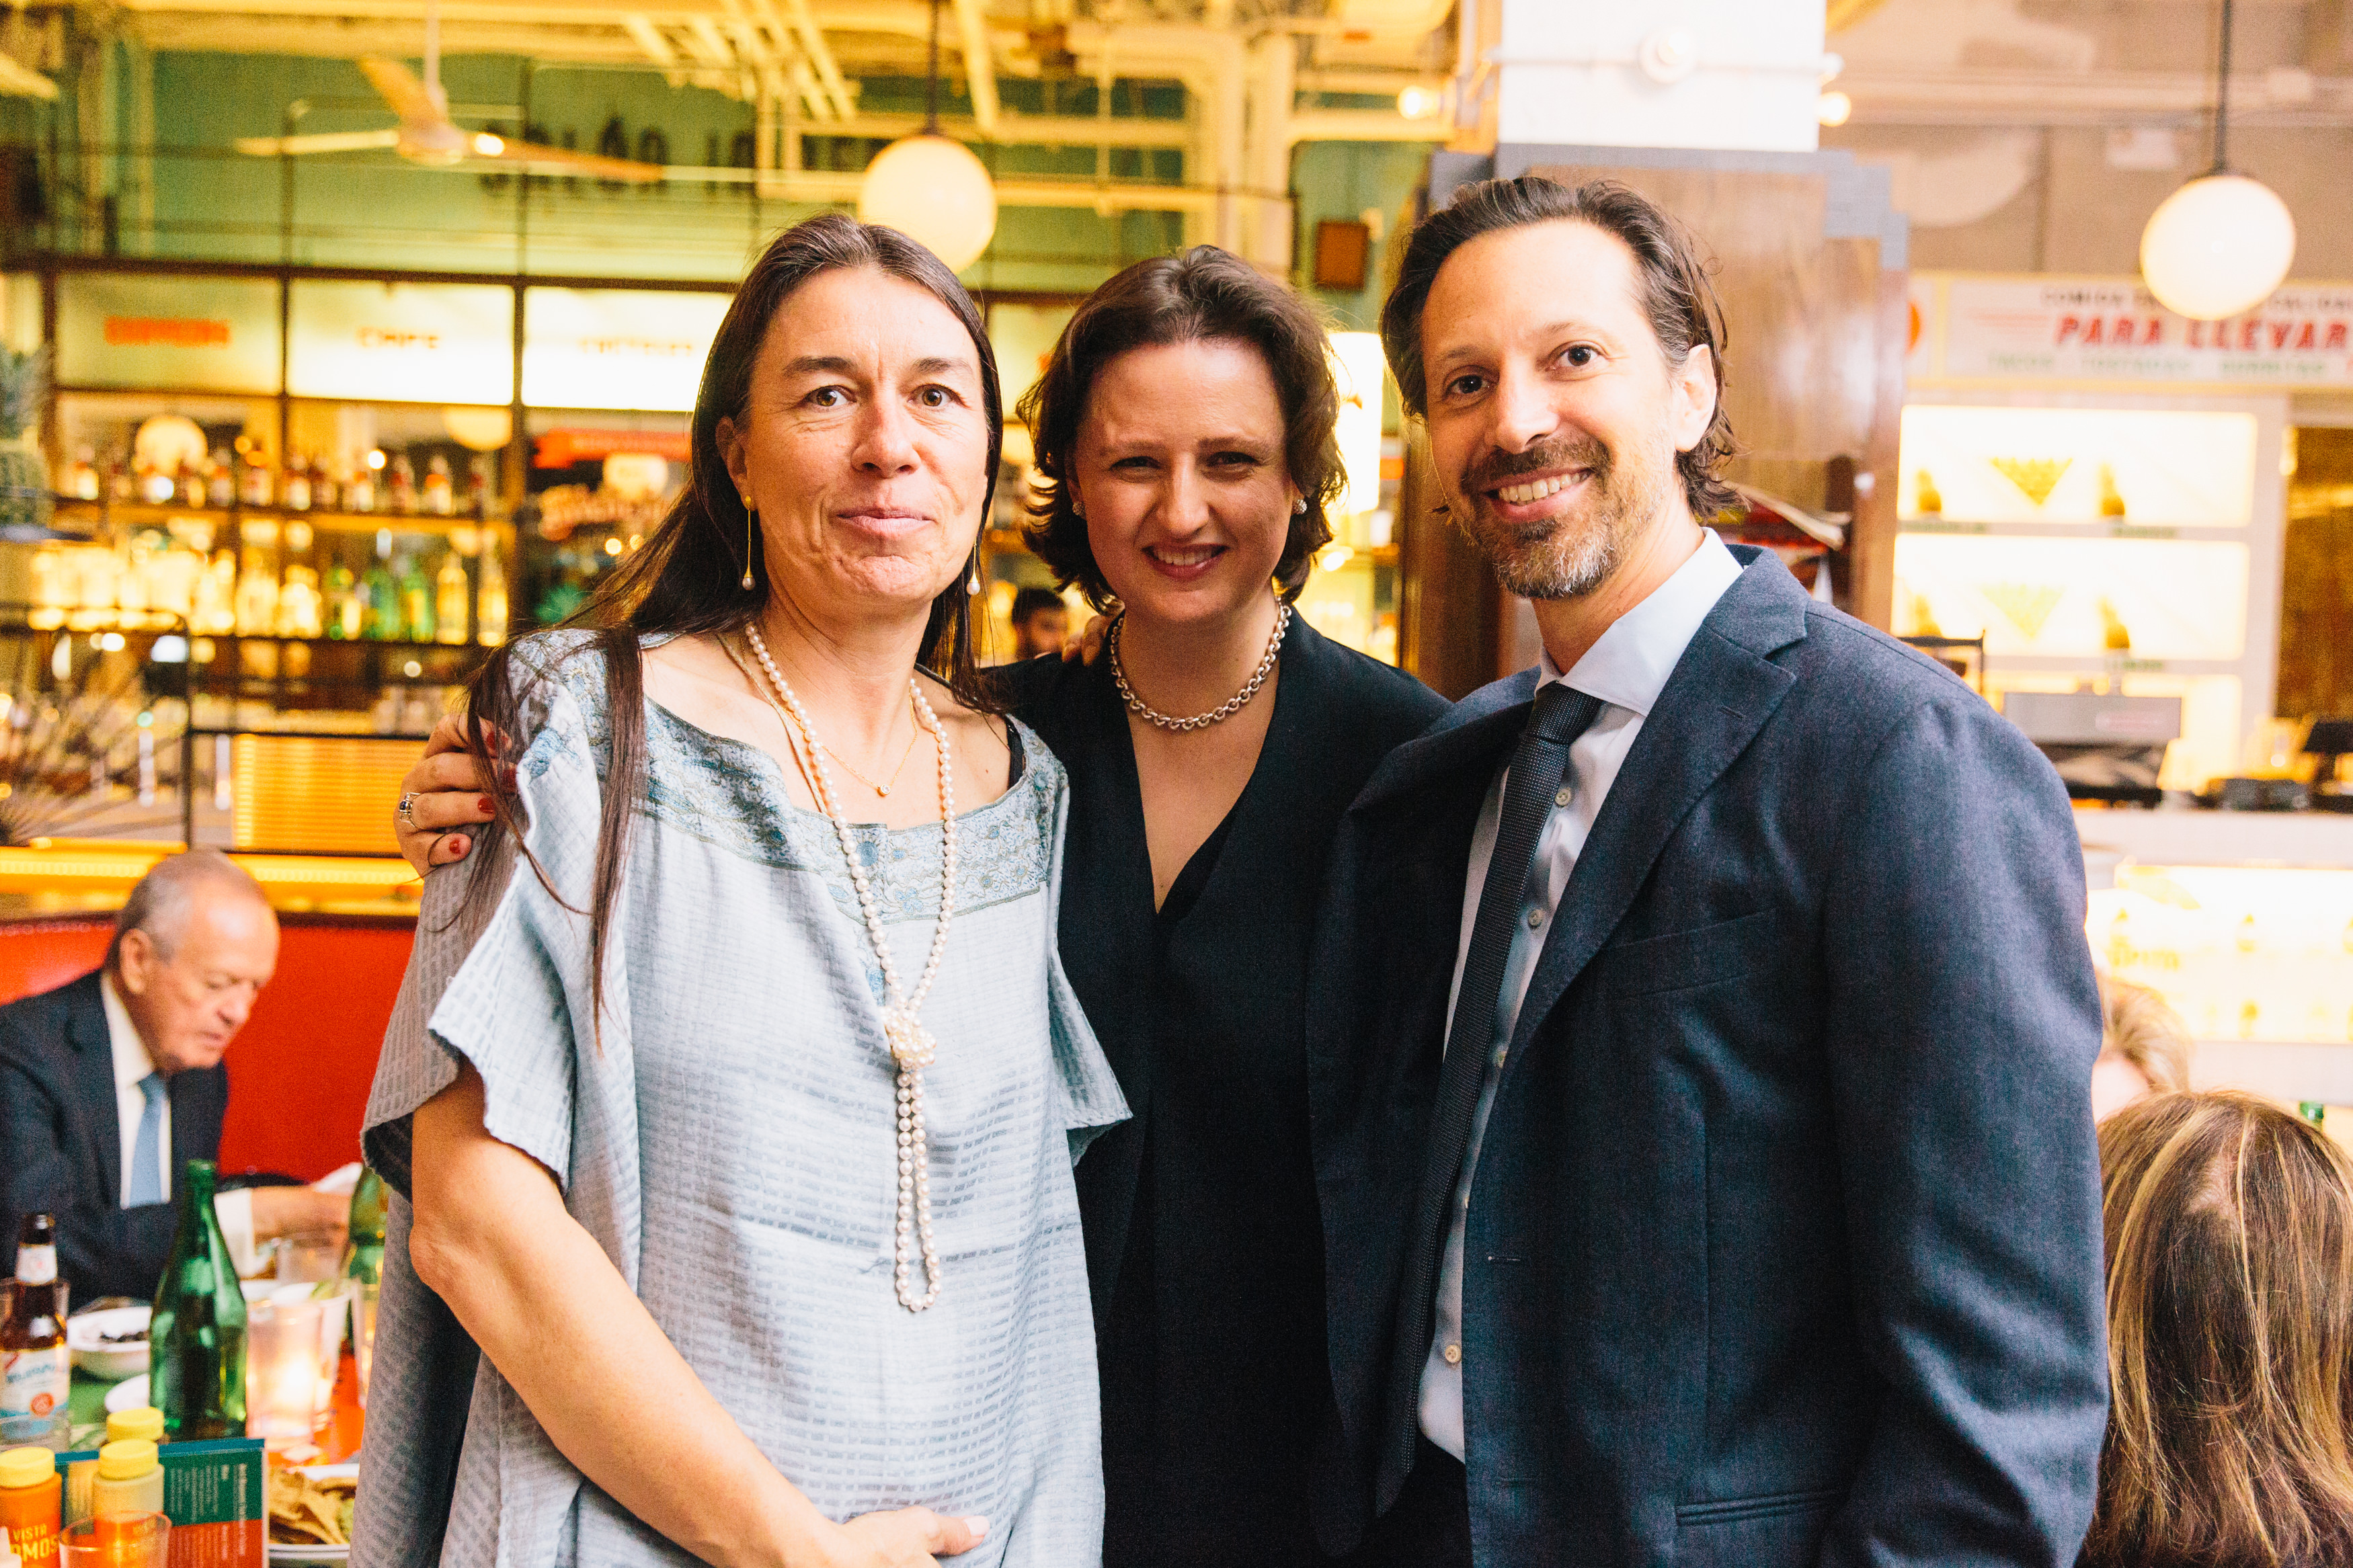 From left, Marilú Hernández, Caterina Toscano, and Dario Wolos.